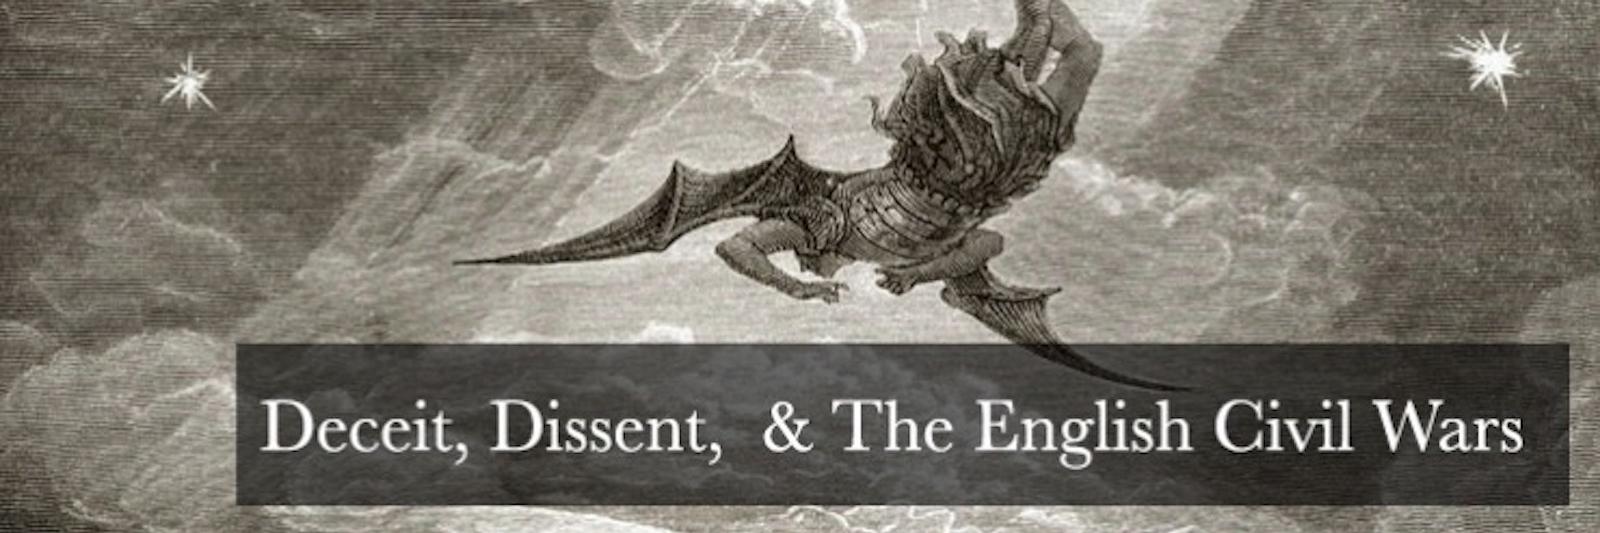 ENGC33: Deceit, Dissent, and the English Civil Wars